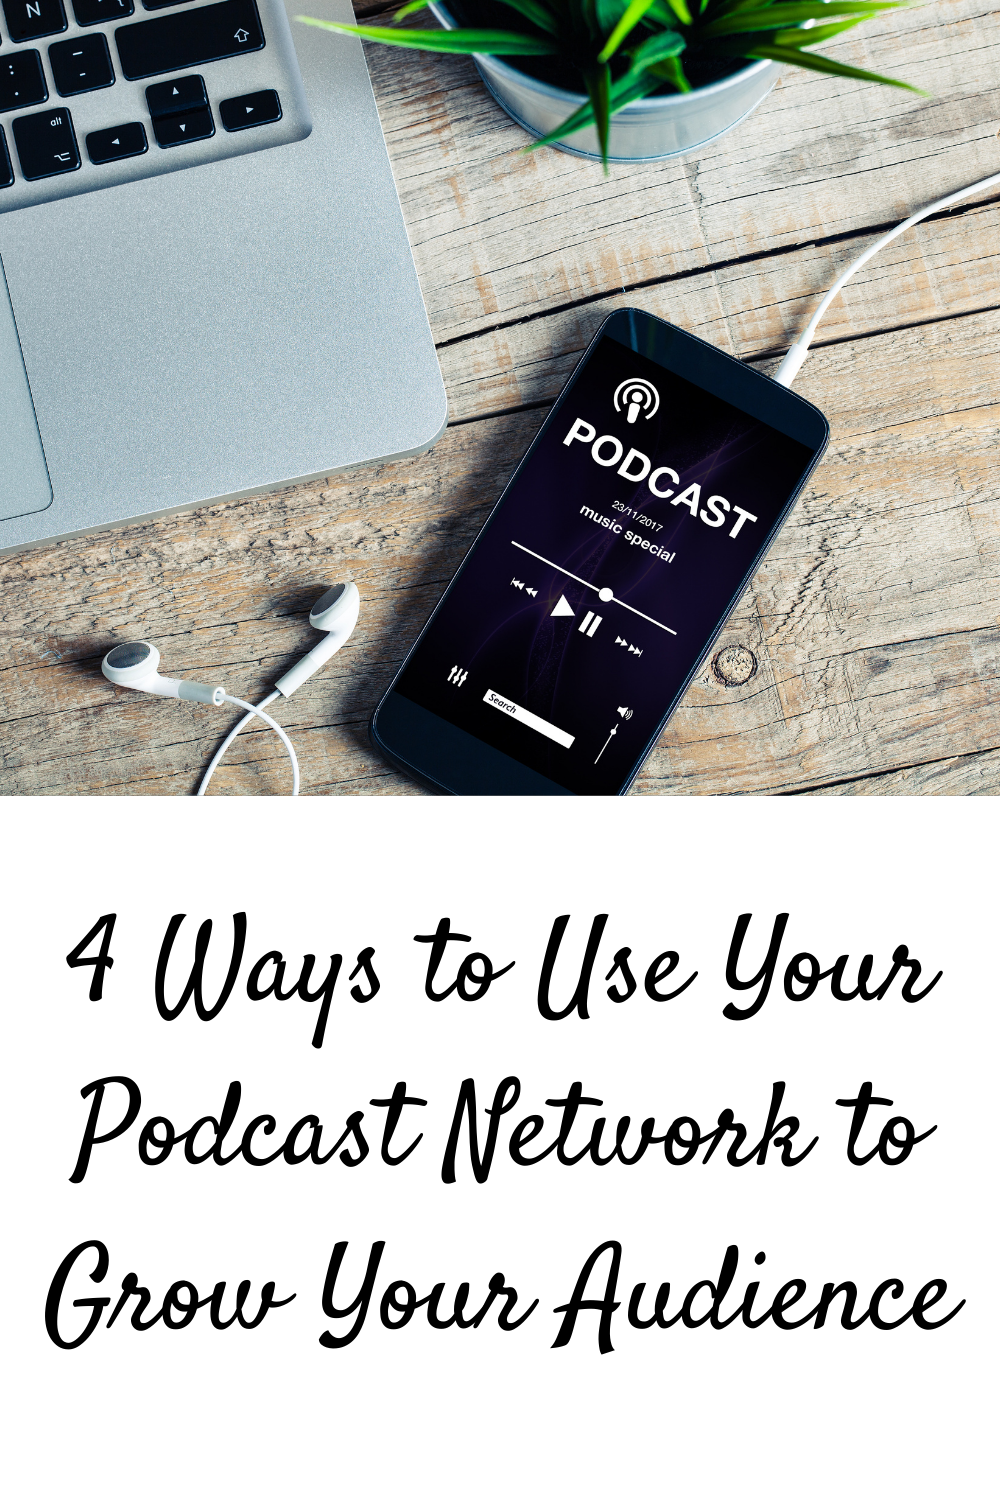 4 Ways to Use Your Podcast Network to Grow Your Audience